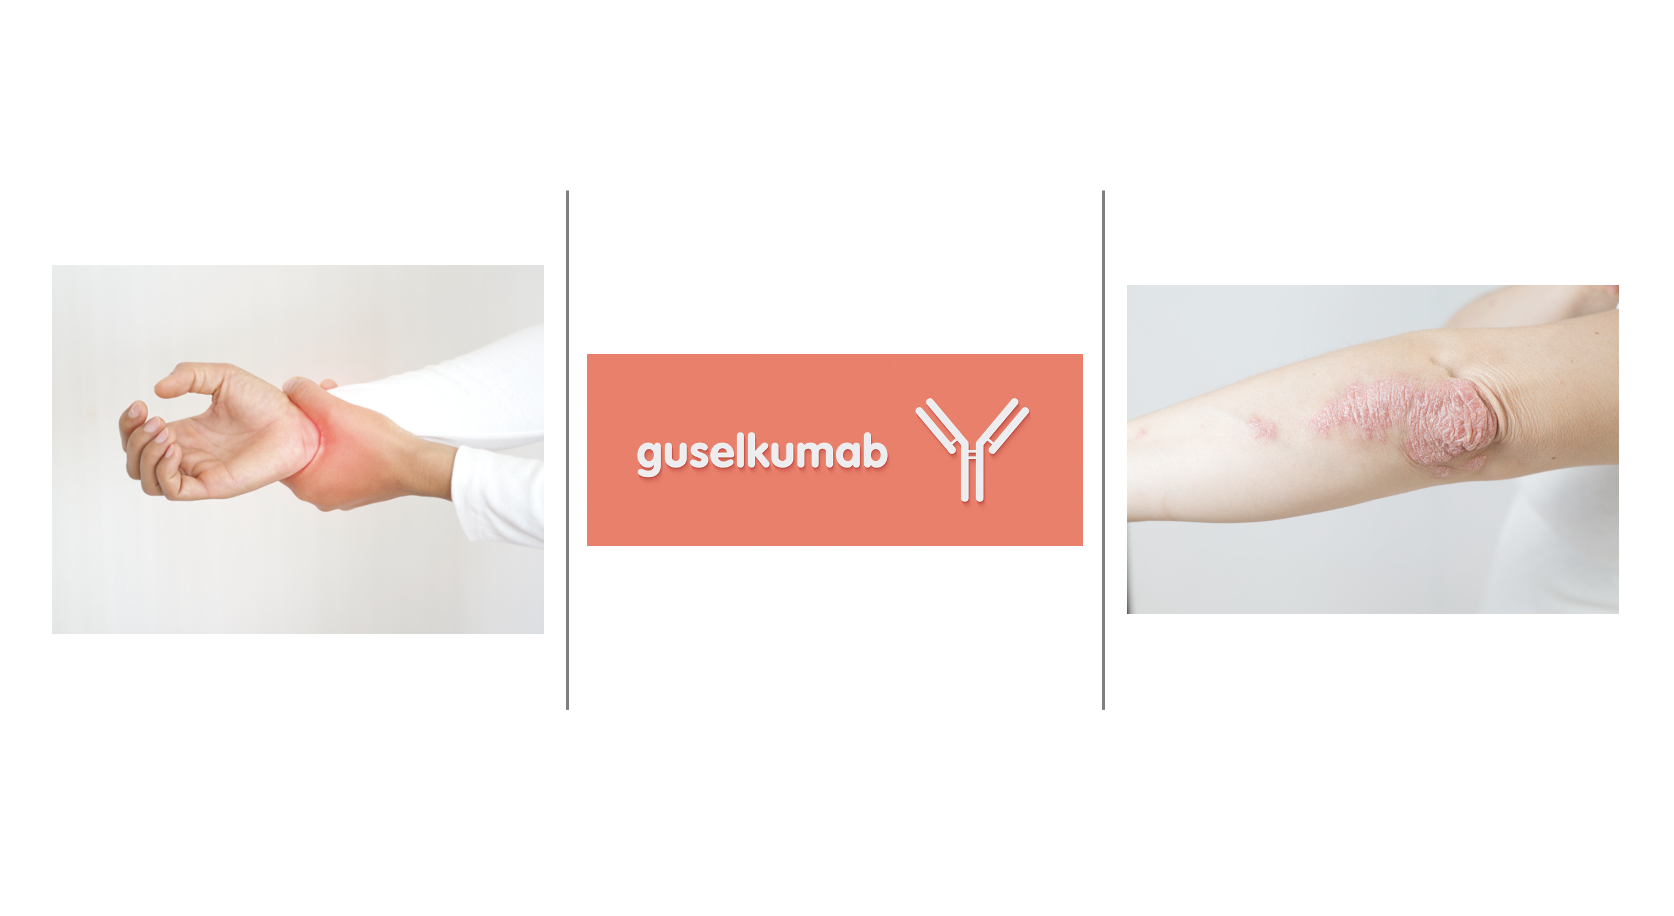 Guselkumab Sustained Long-Term Efficacy in Patients with Active Psoriatic Arthritis